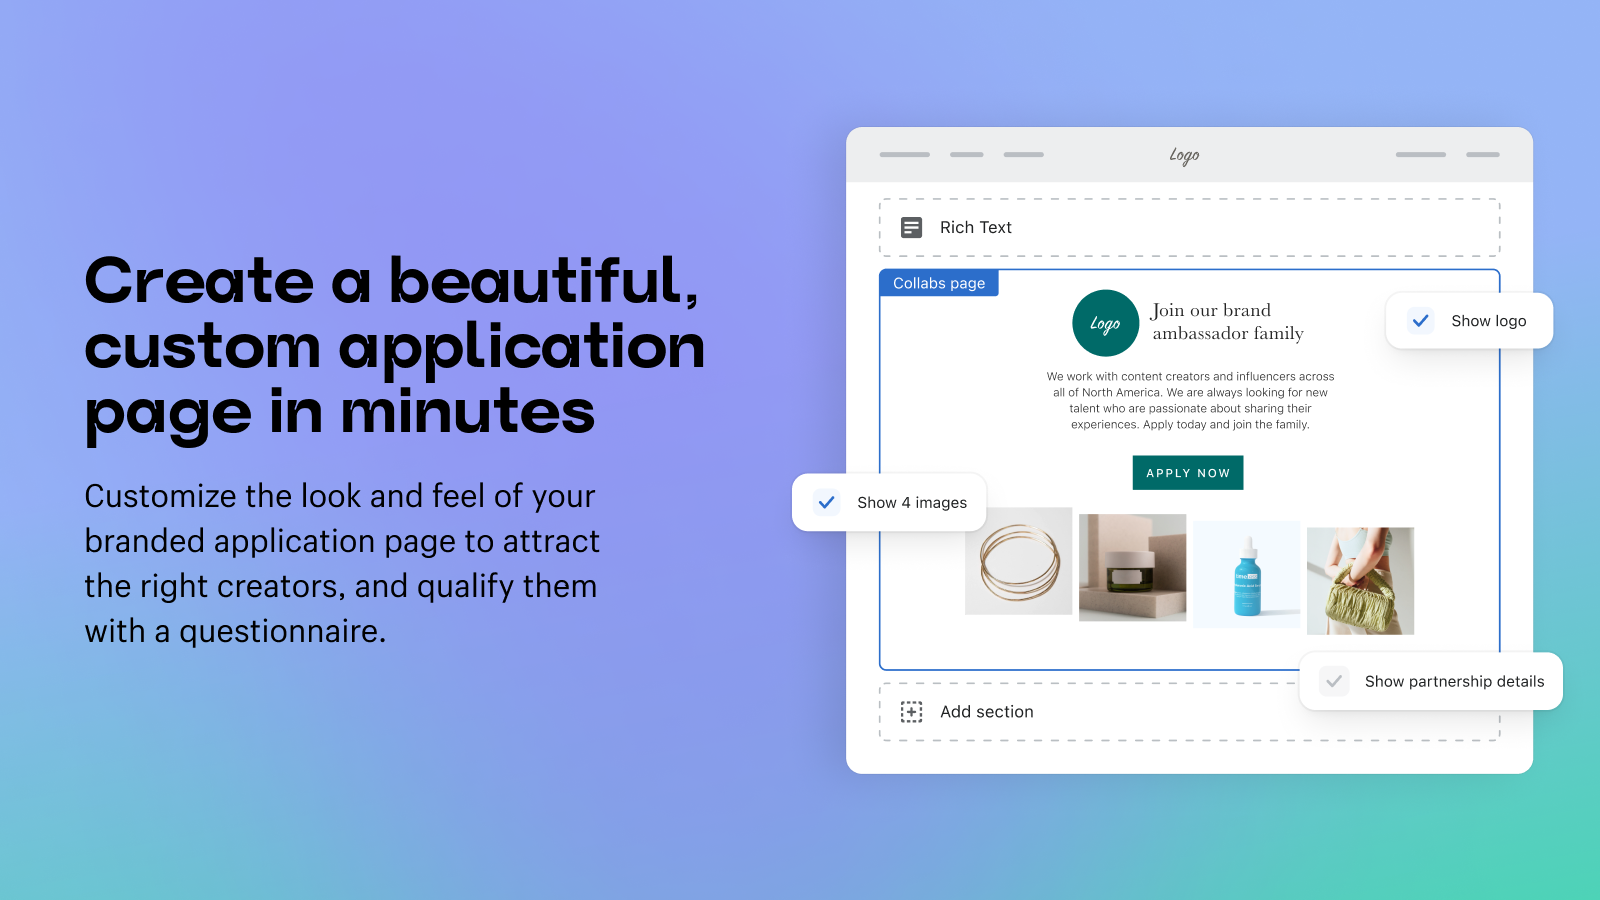 Create a beautiful, custom application page in minutes